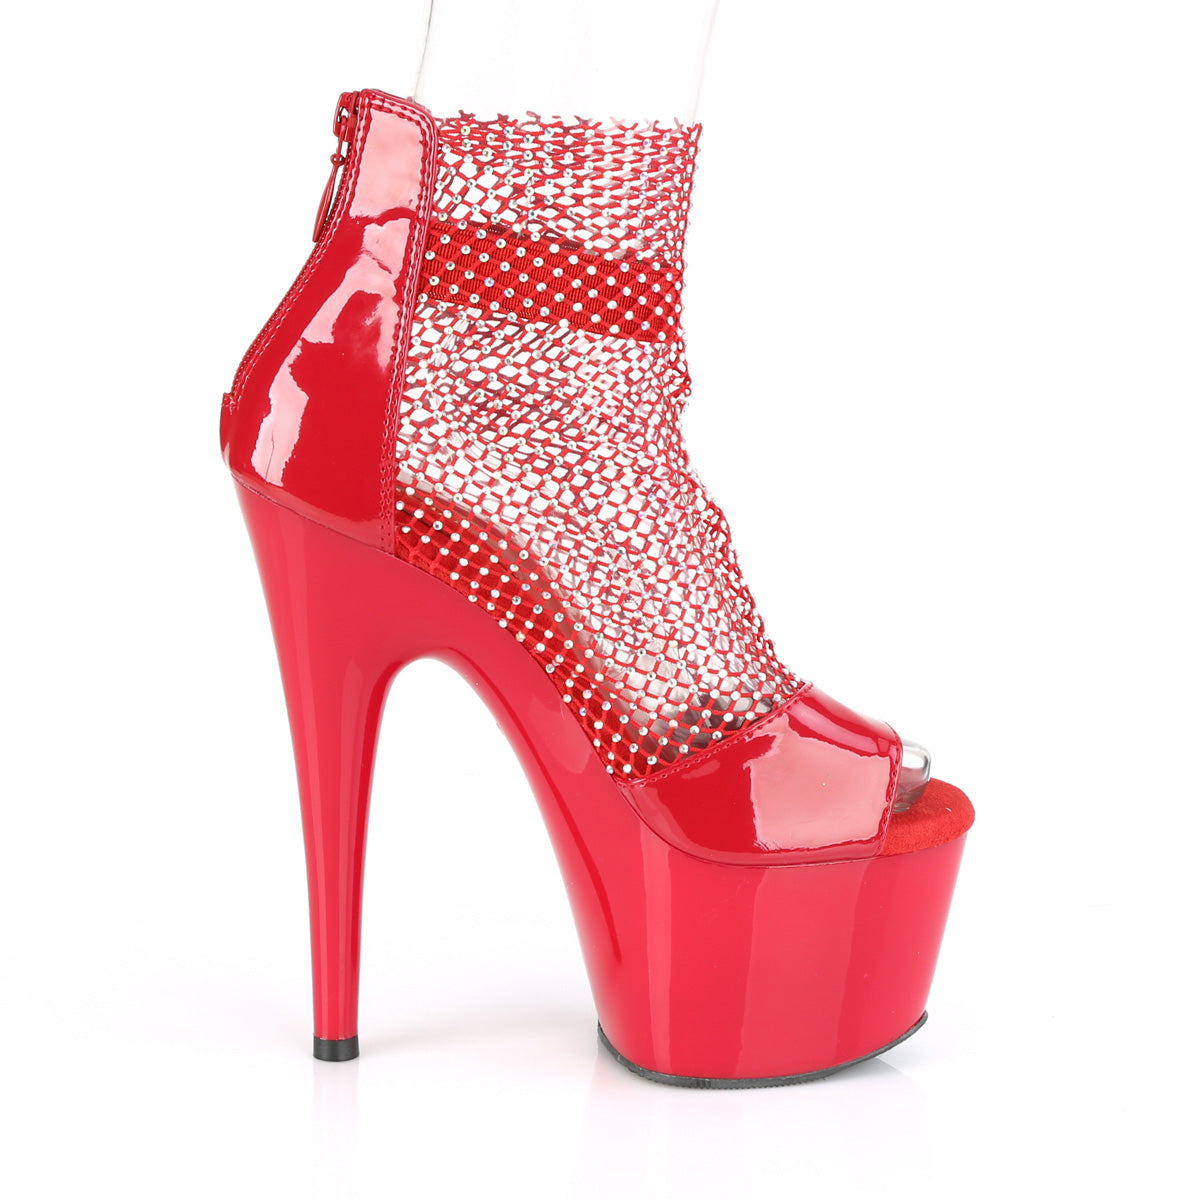 ADORE-765RM Pleasers Red Patent Platform Exotic Dancing Bling Mesh Heels